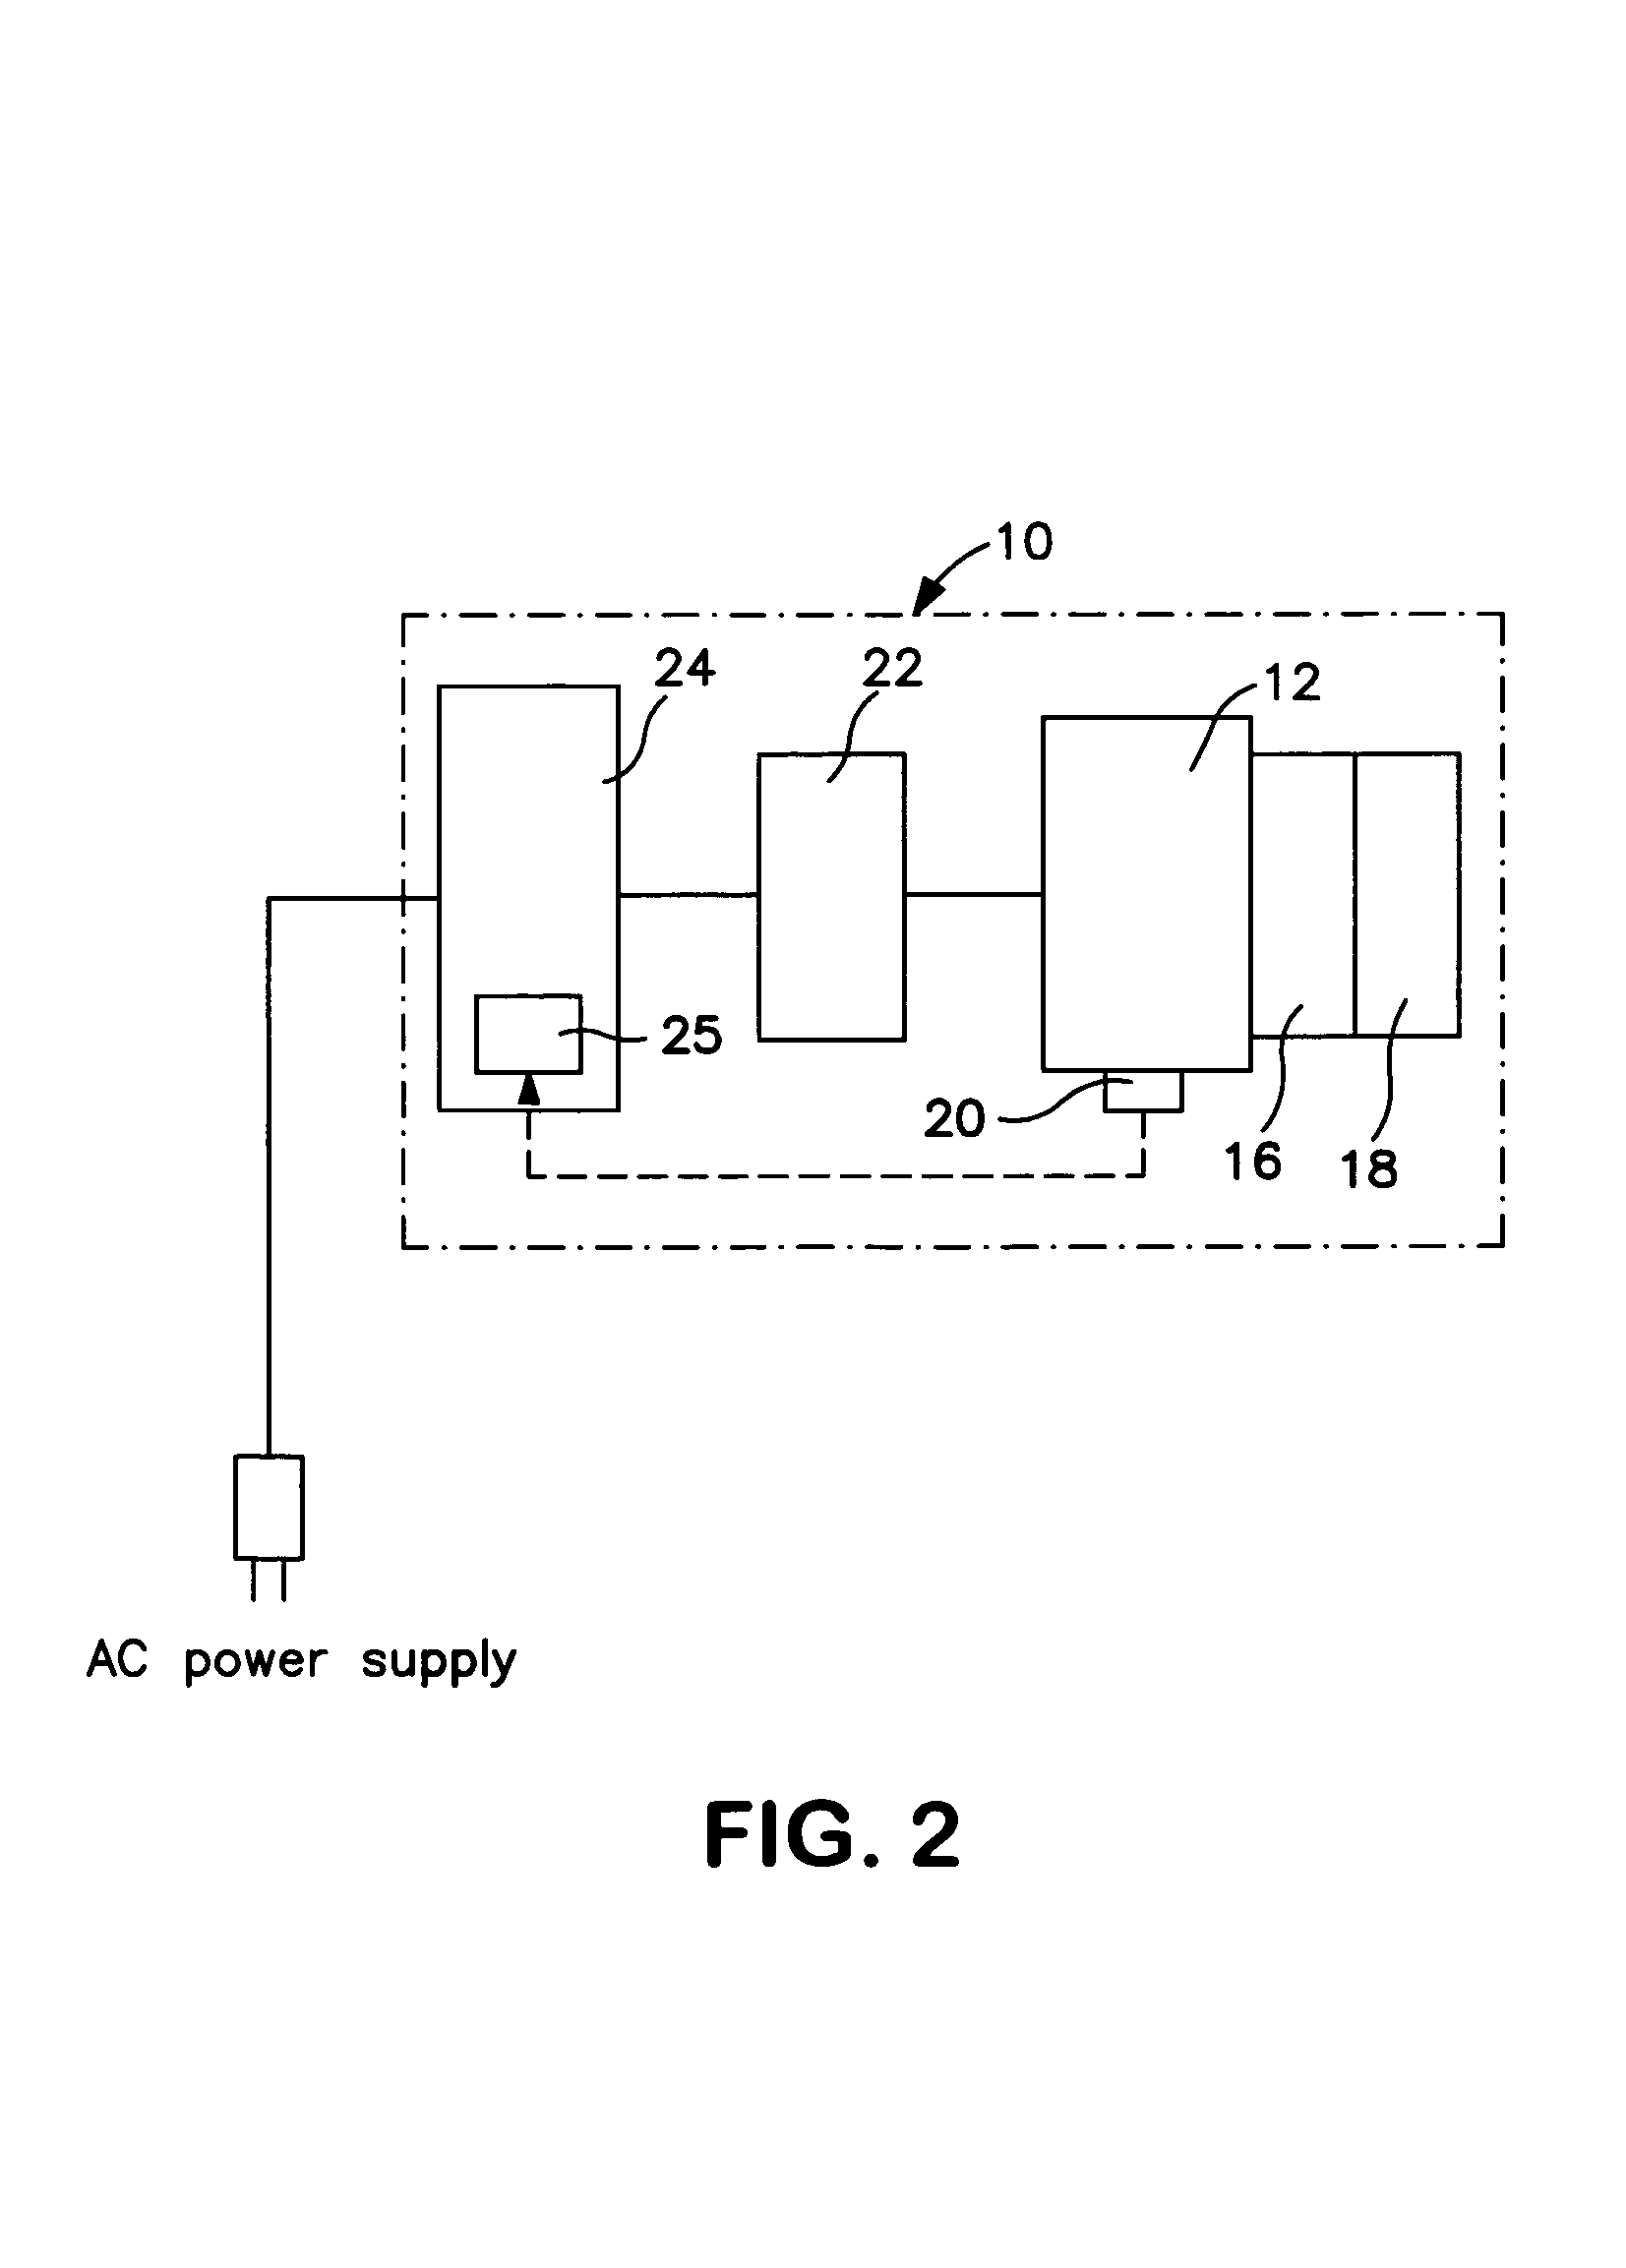 Motor-driven rotary tool with internal heating temperature detecting function